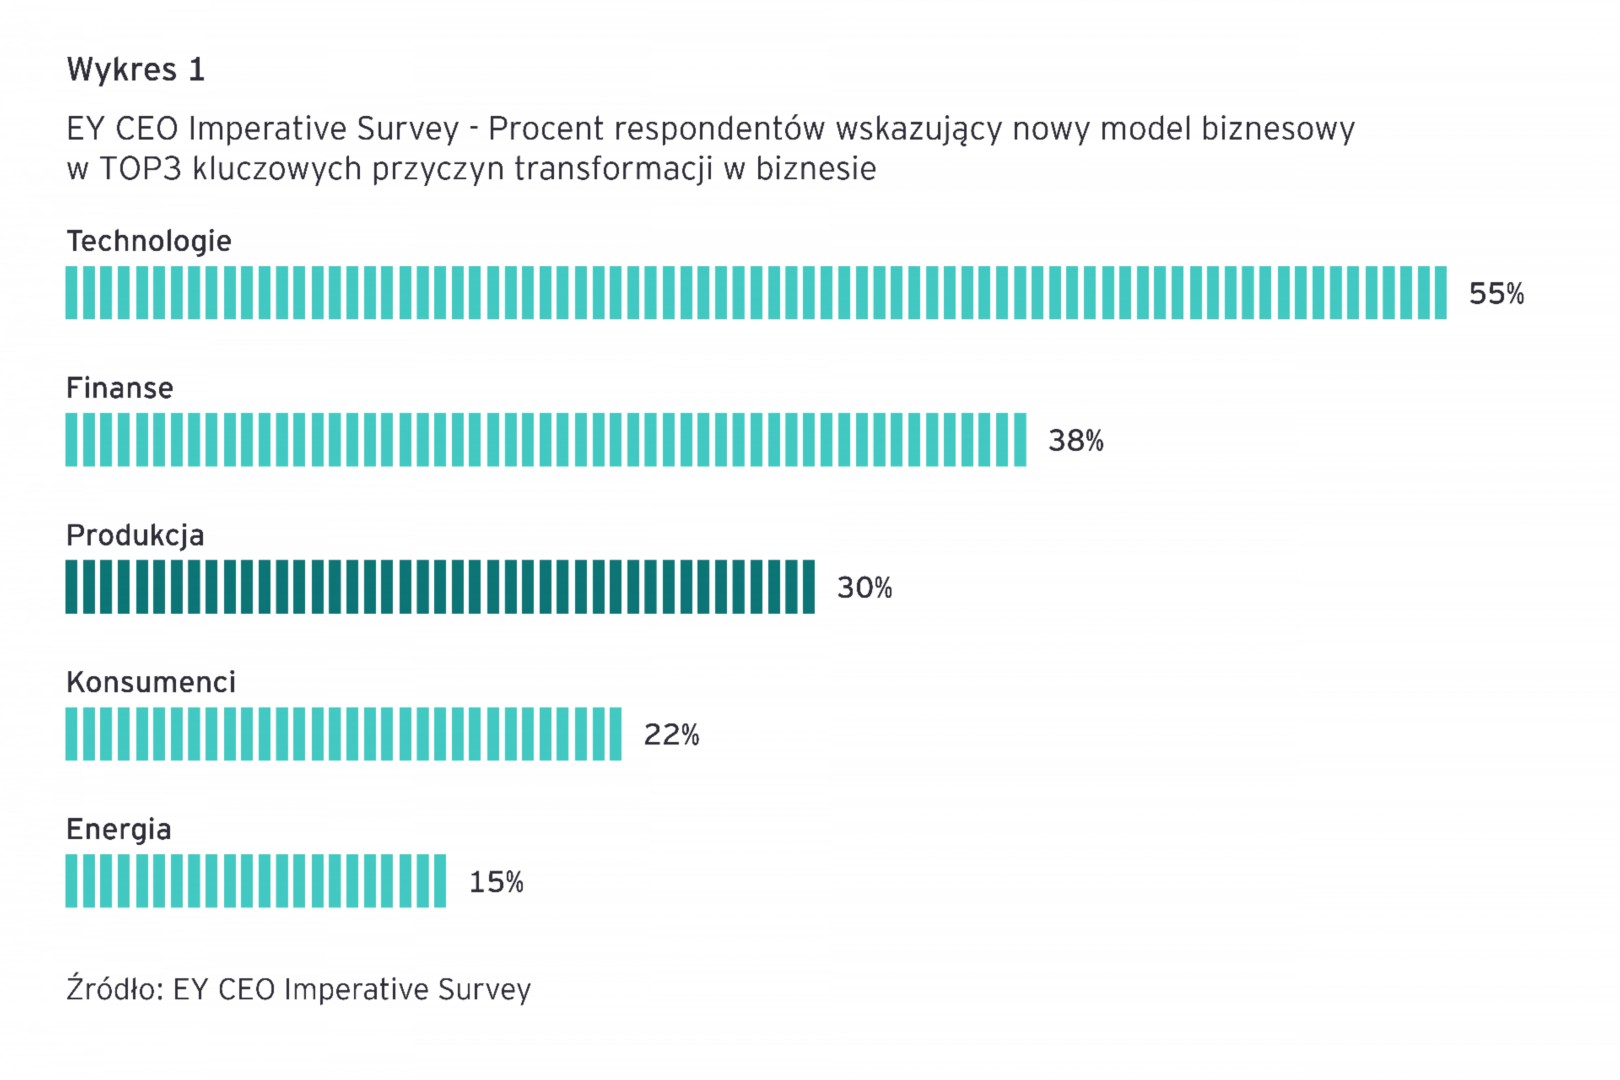 Percent of respondents identifying new business models as a top 3 transformation driver in their industry